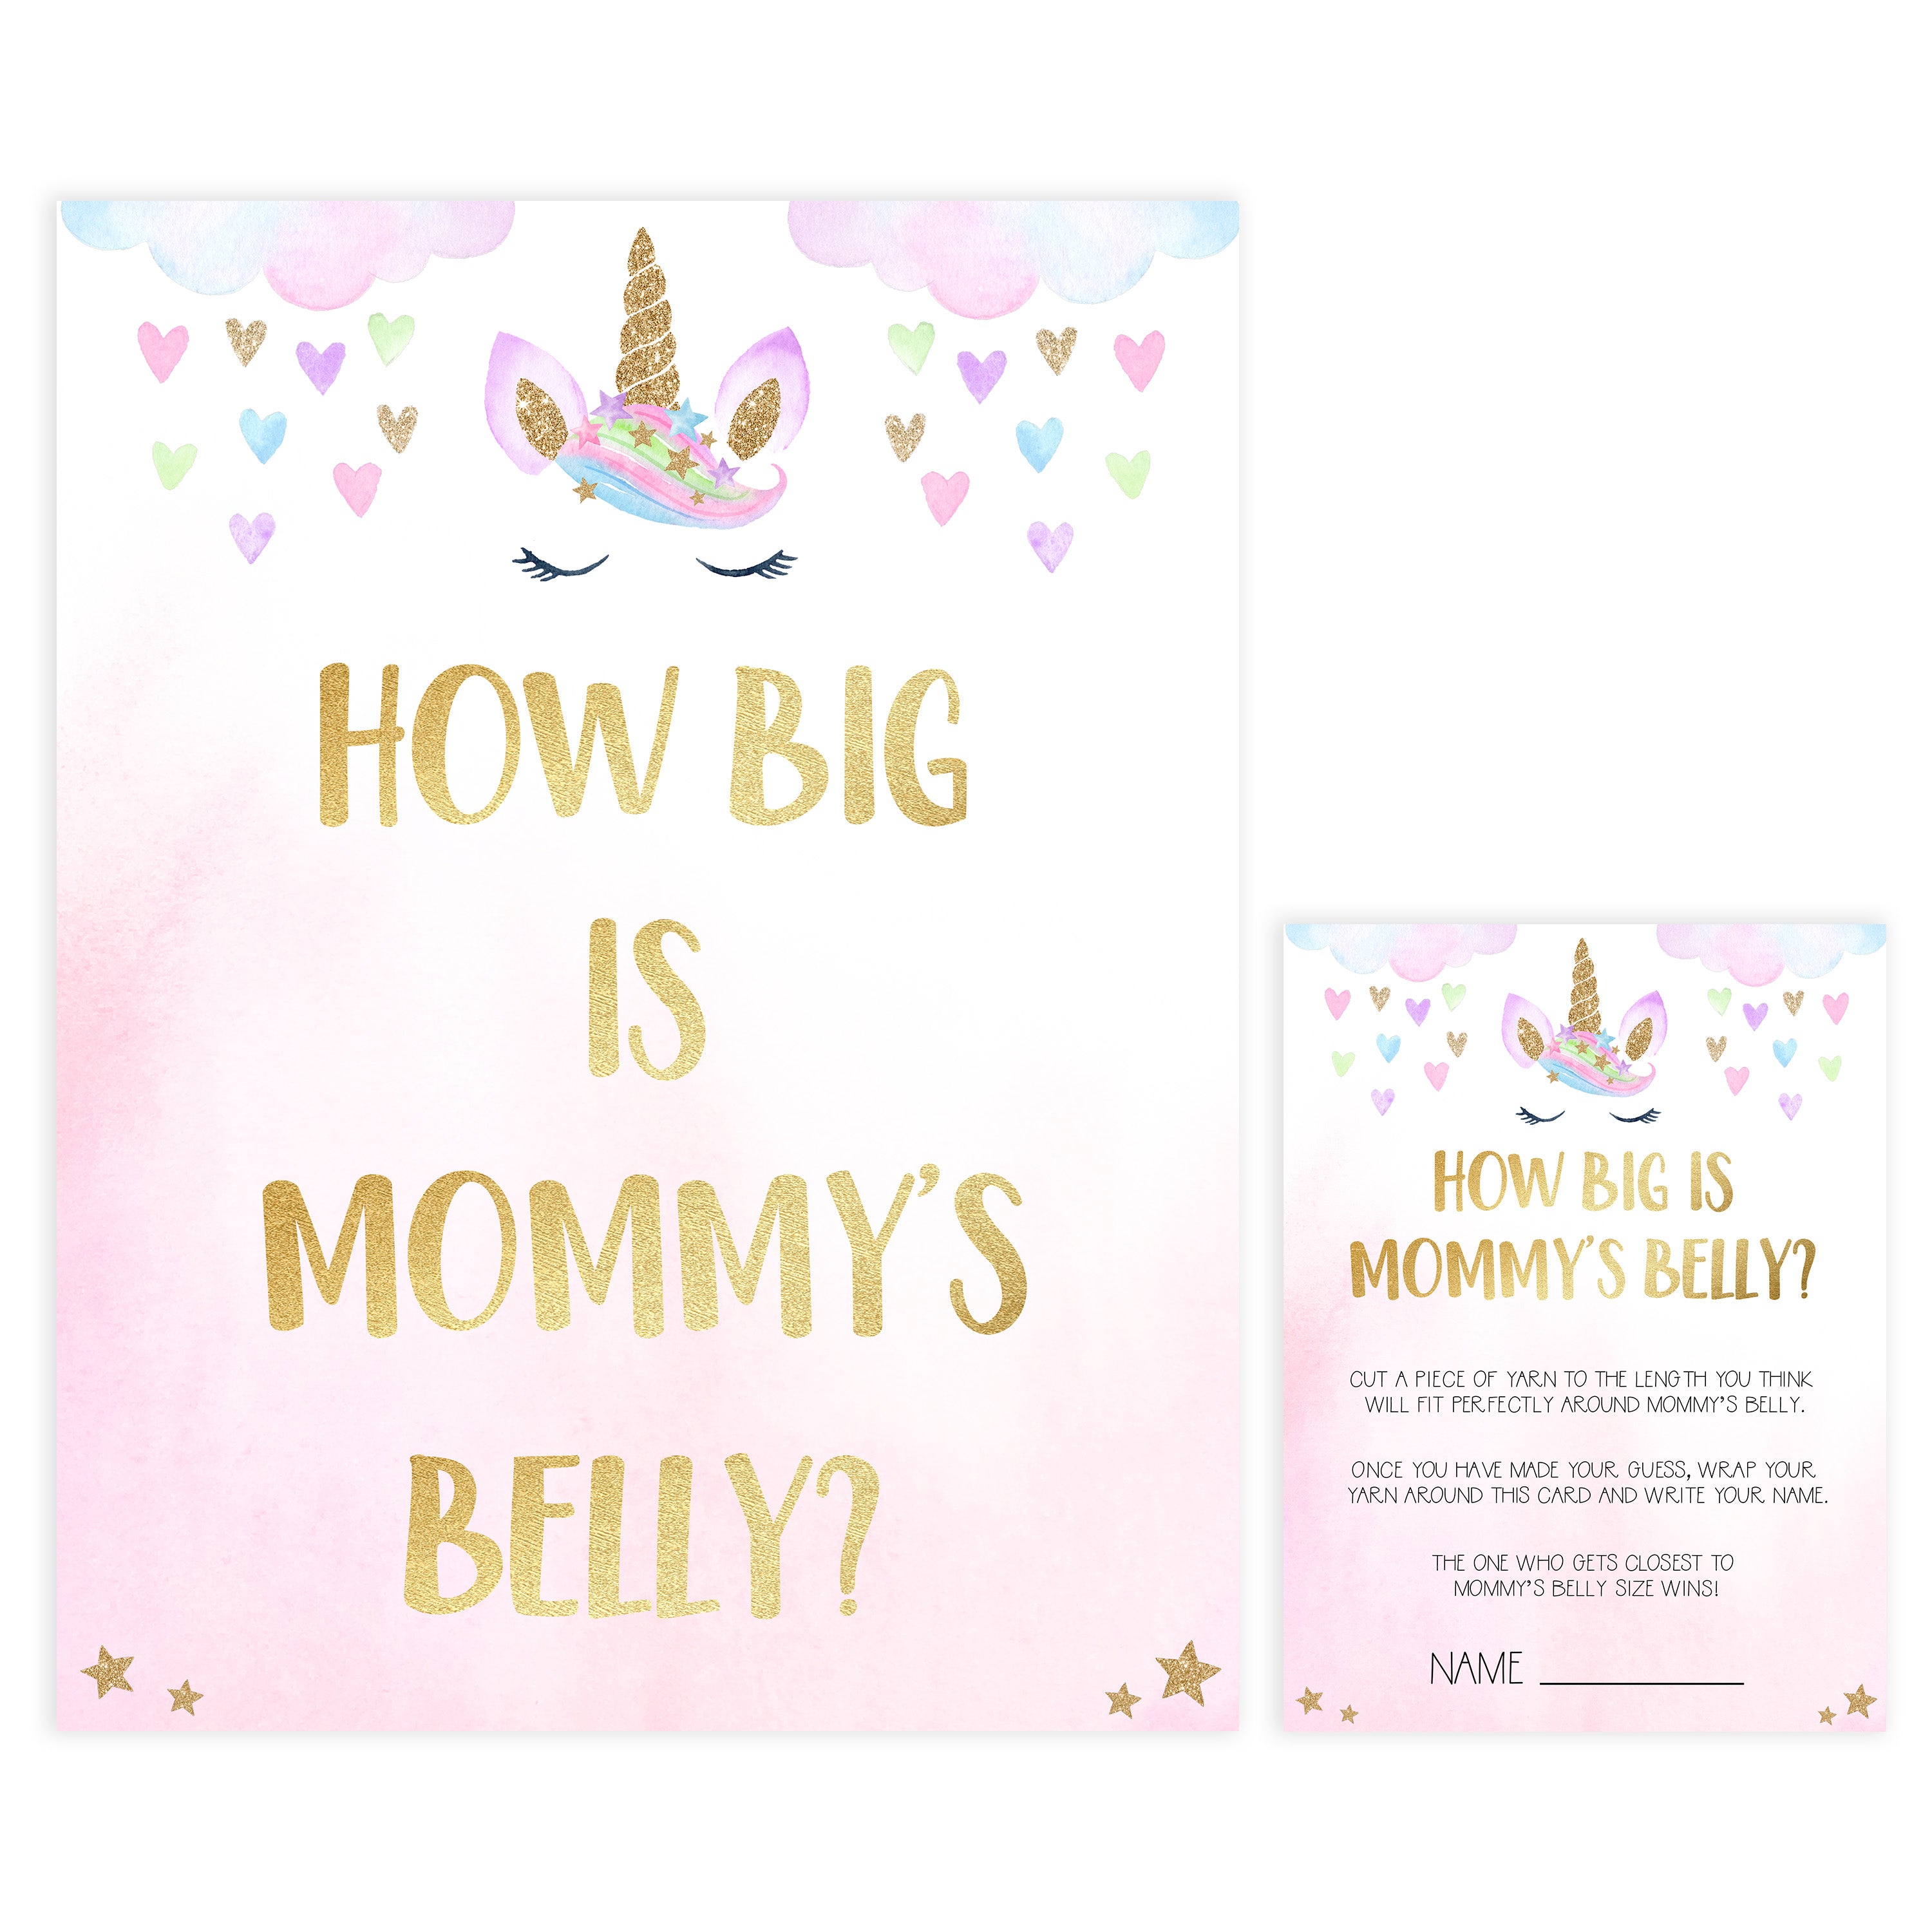 how big is mommys belly game, Printable baby shower games, unicorn baby games, baby shower games, fun baby shower ideas, top baby shower ideas, unicorn baby shower, baby shower games, fun unicorn baby shower ideas